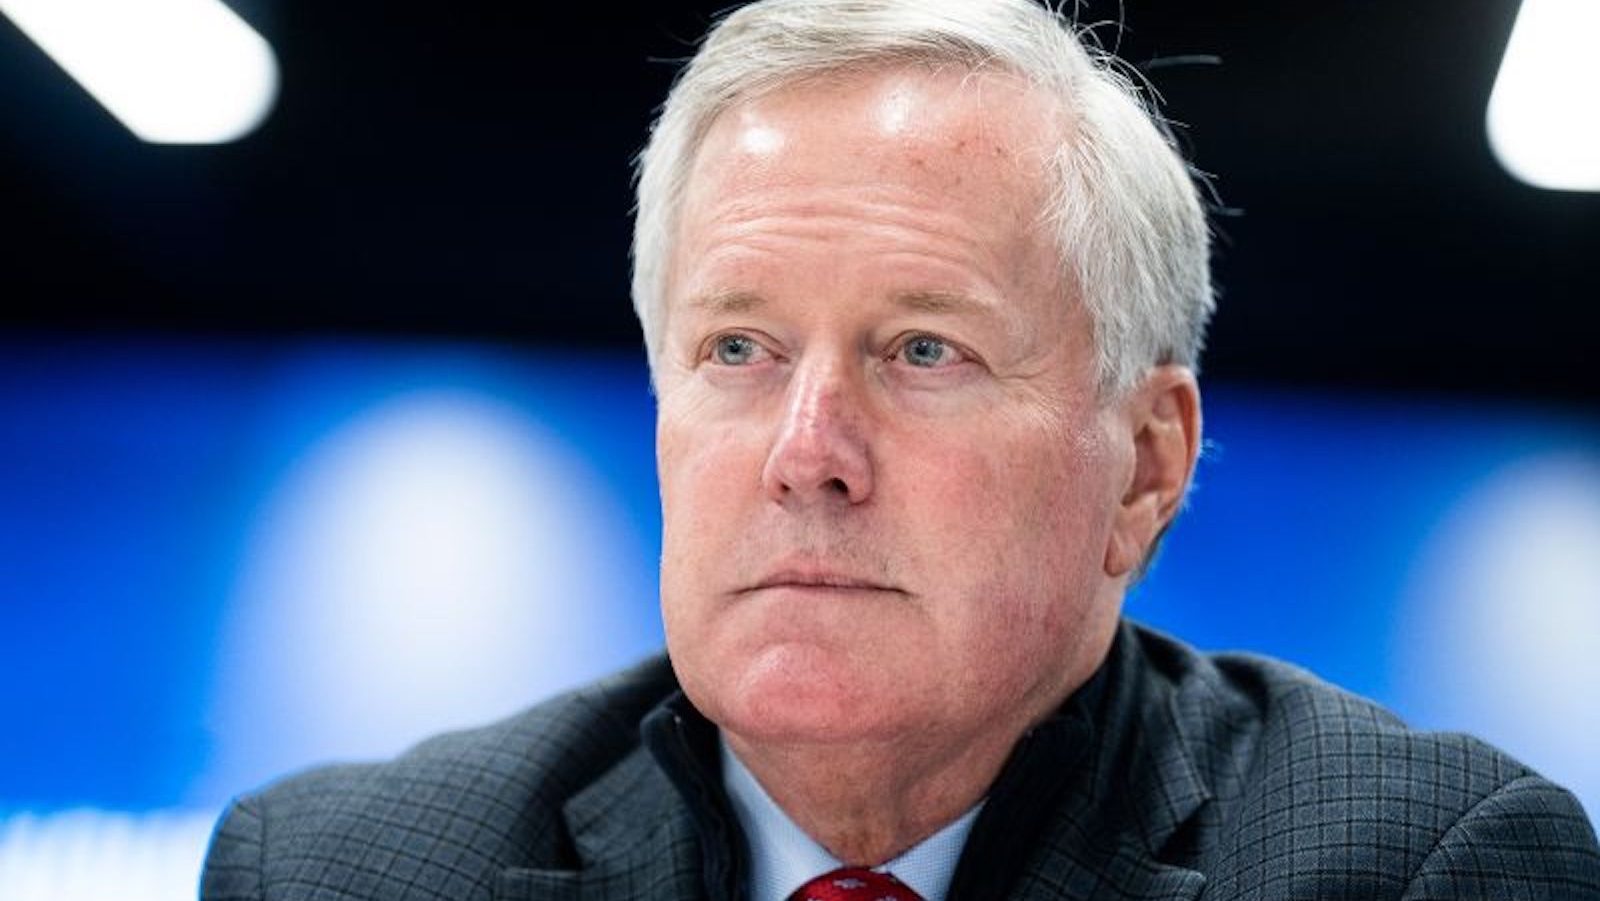 Mark Meadows is asking an appeals court to reconsider his failed bid to move the Georgia election tampering case to federal court.